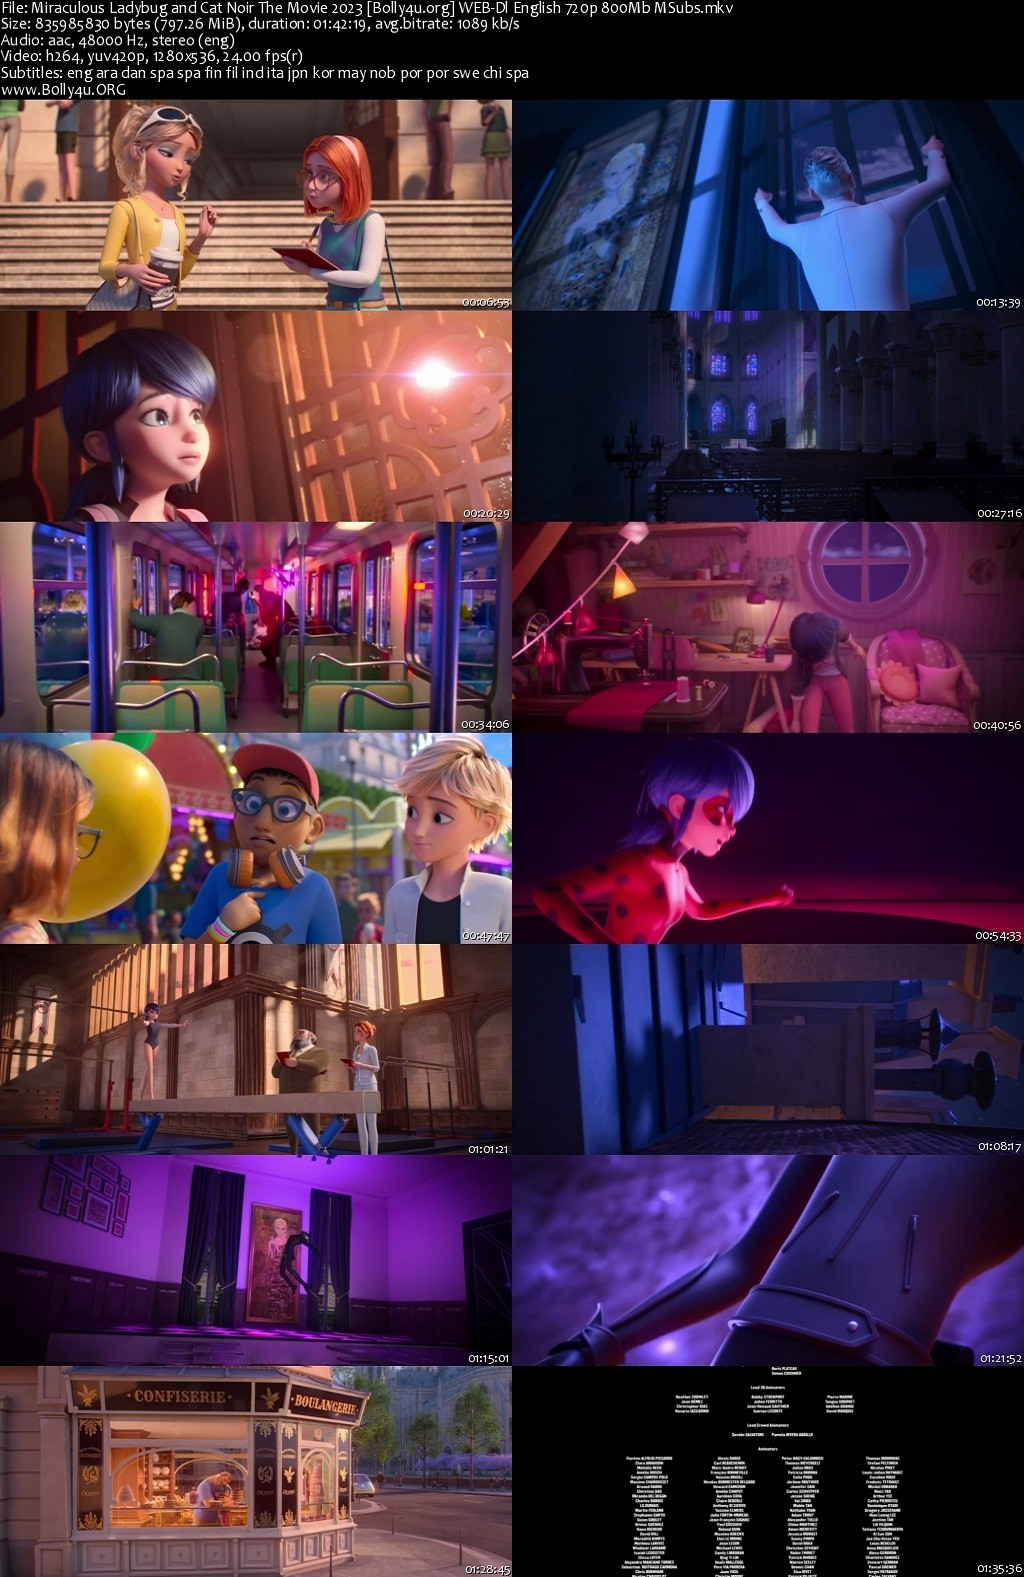 18+ Miraculous Ladybug and Cat Noir The Movie 2023 WEB-DL English Full Movie Download 720p 480p